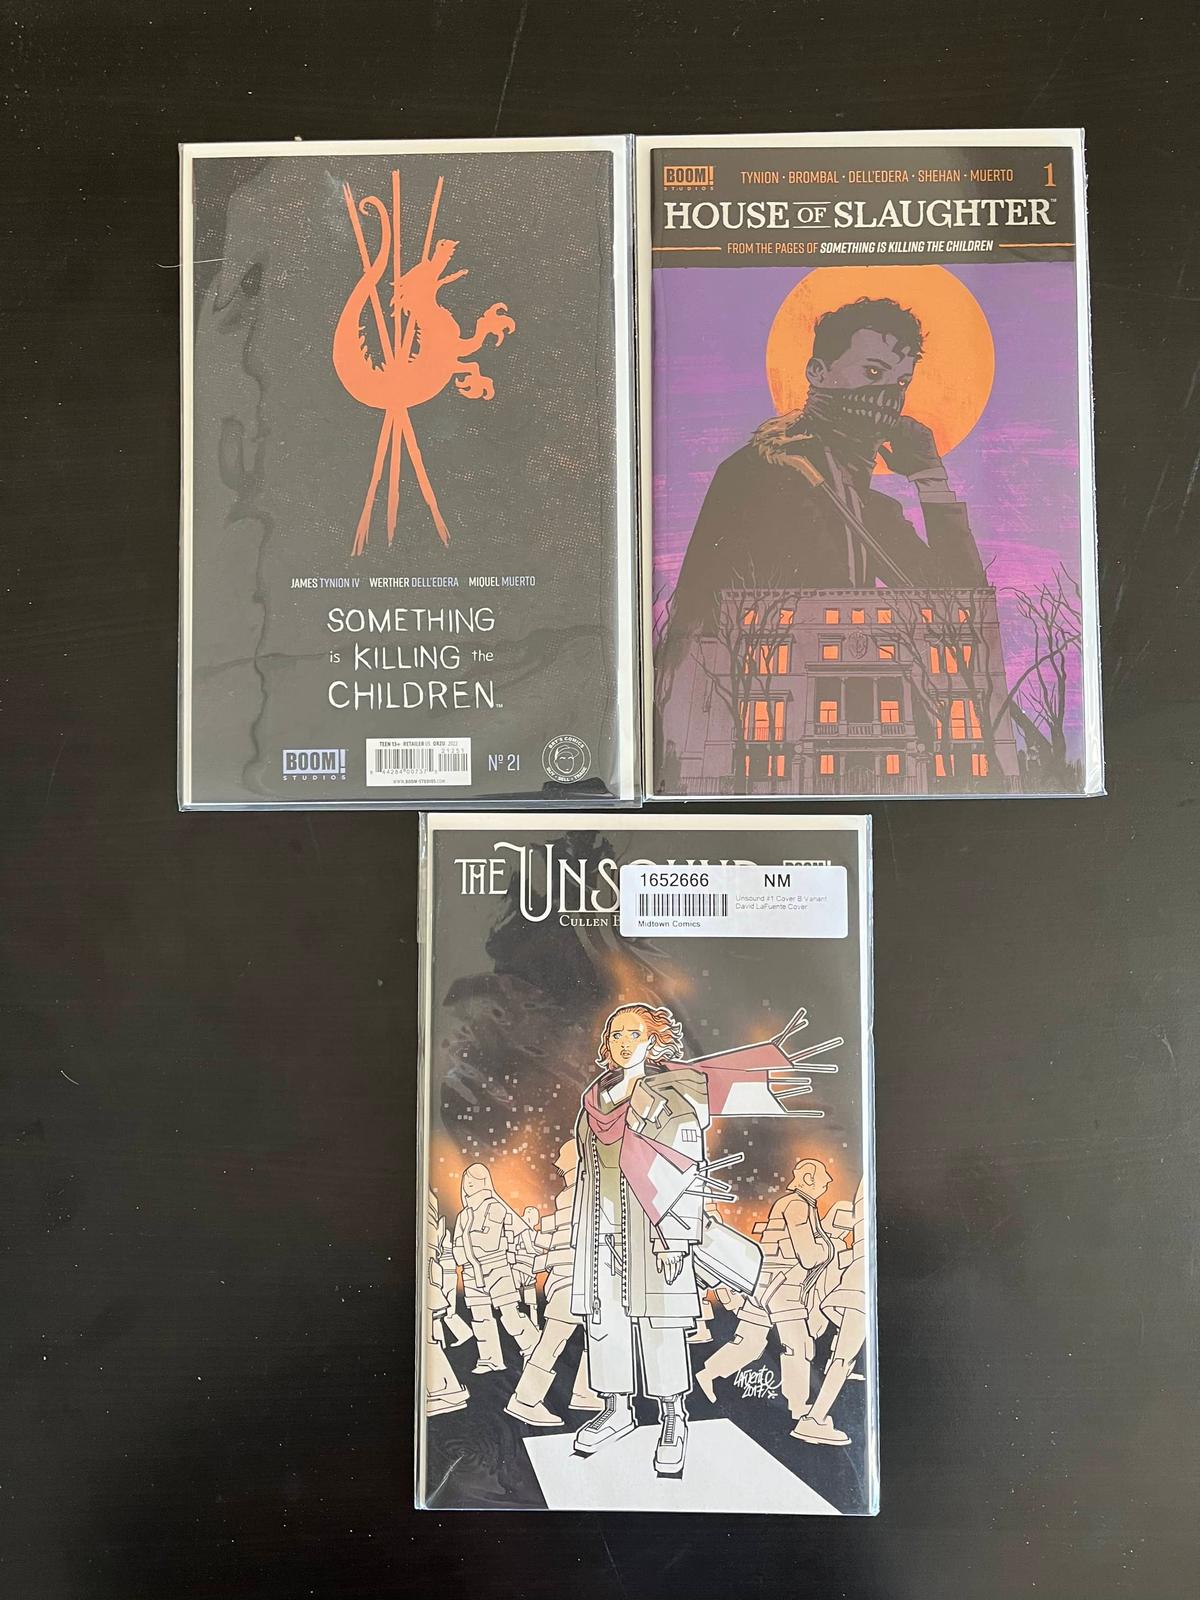 3 Issues Boom Studios House of Slaughter #1 Something is Killing the Children #21 & The Unsound #1